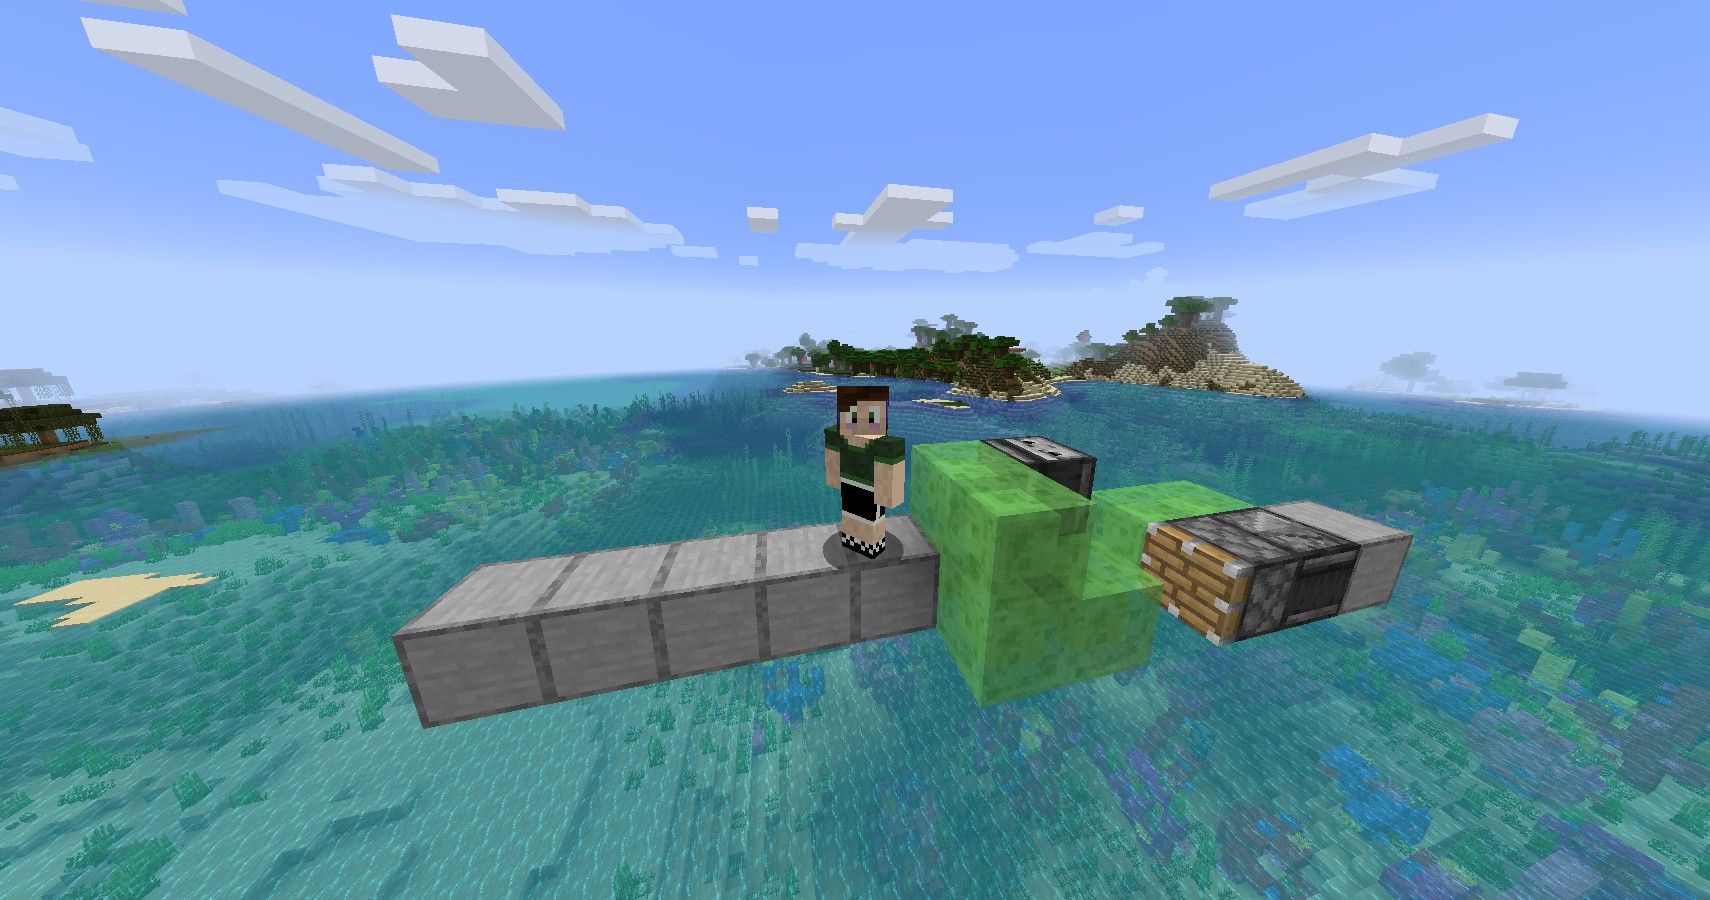 Minecraft: How To Make A Flying Machine With Slime Blocks